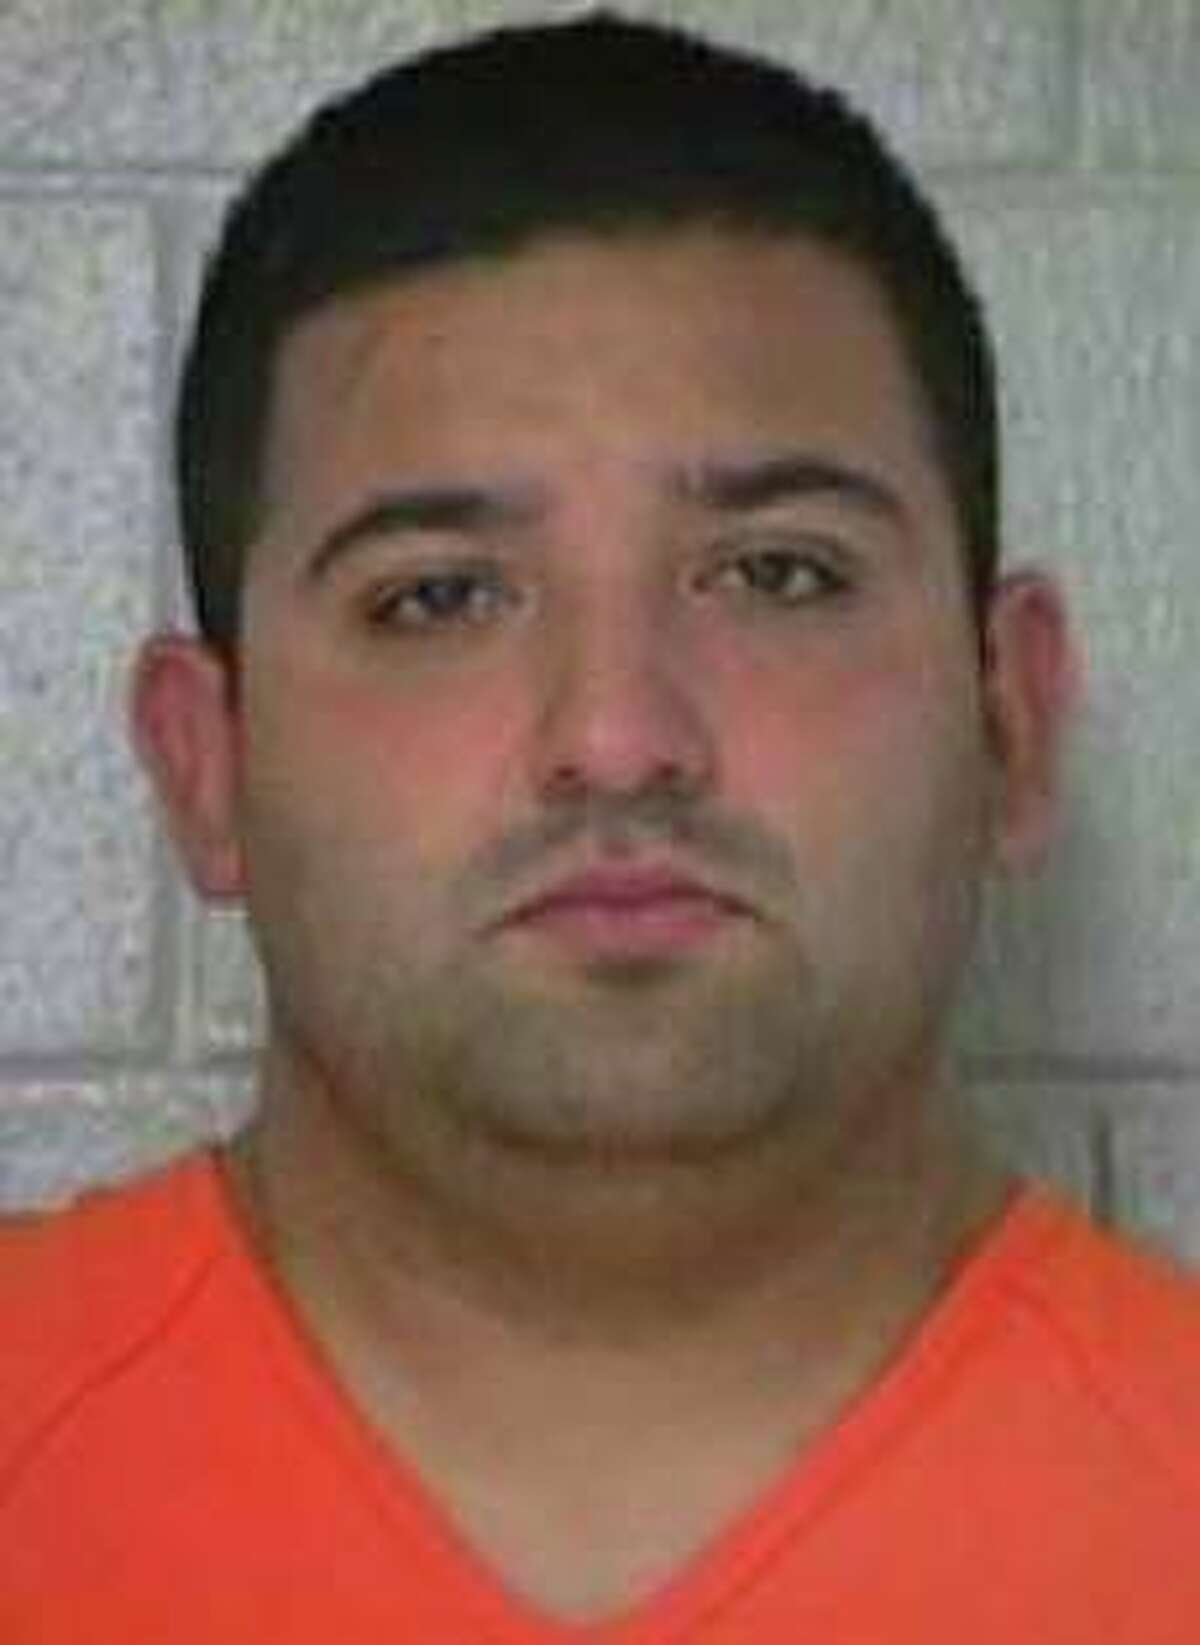 BCSO Deputy Juan V. Medrano, was arrested Aug. 6 on a misdemeanor charge of driving while intoxicated.